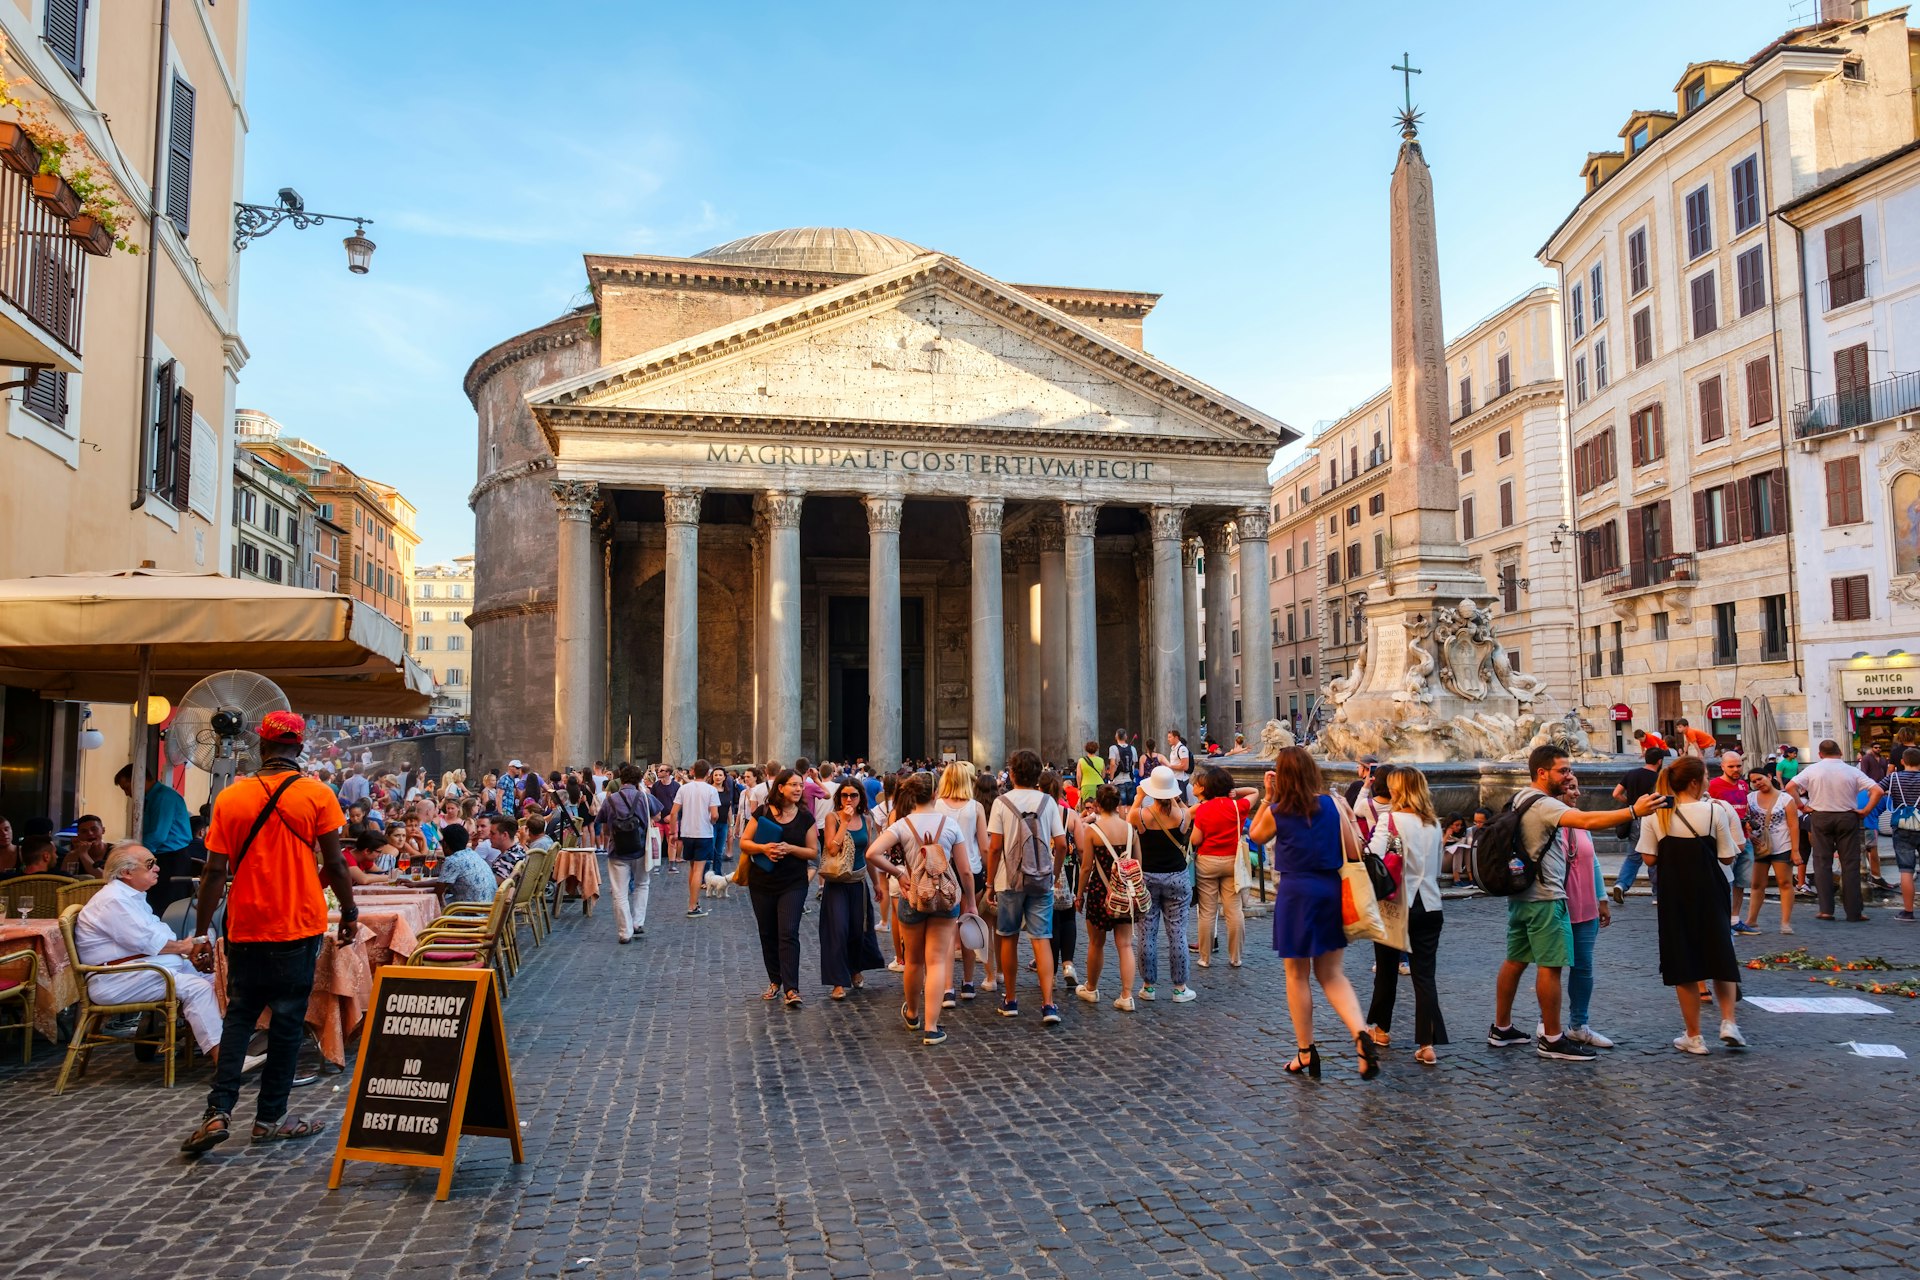 Visitors enjoy the Pantheon in Rome at sunset